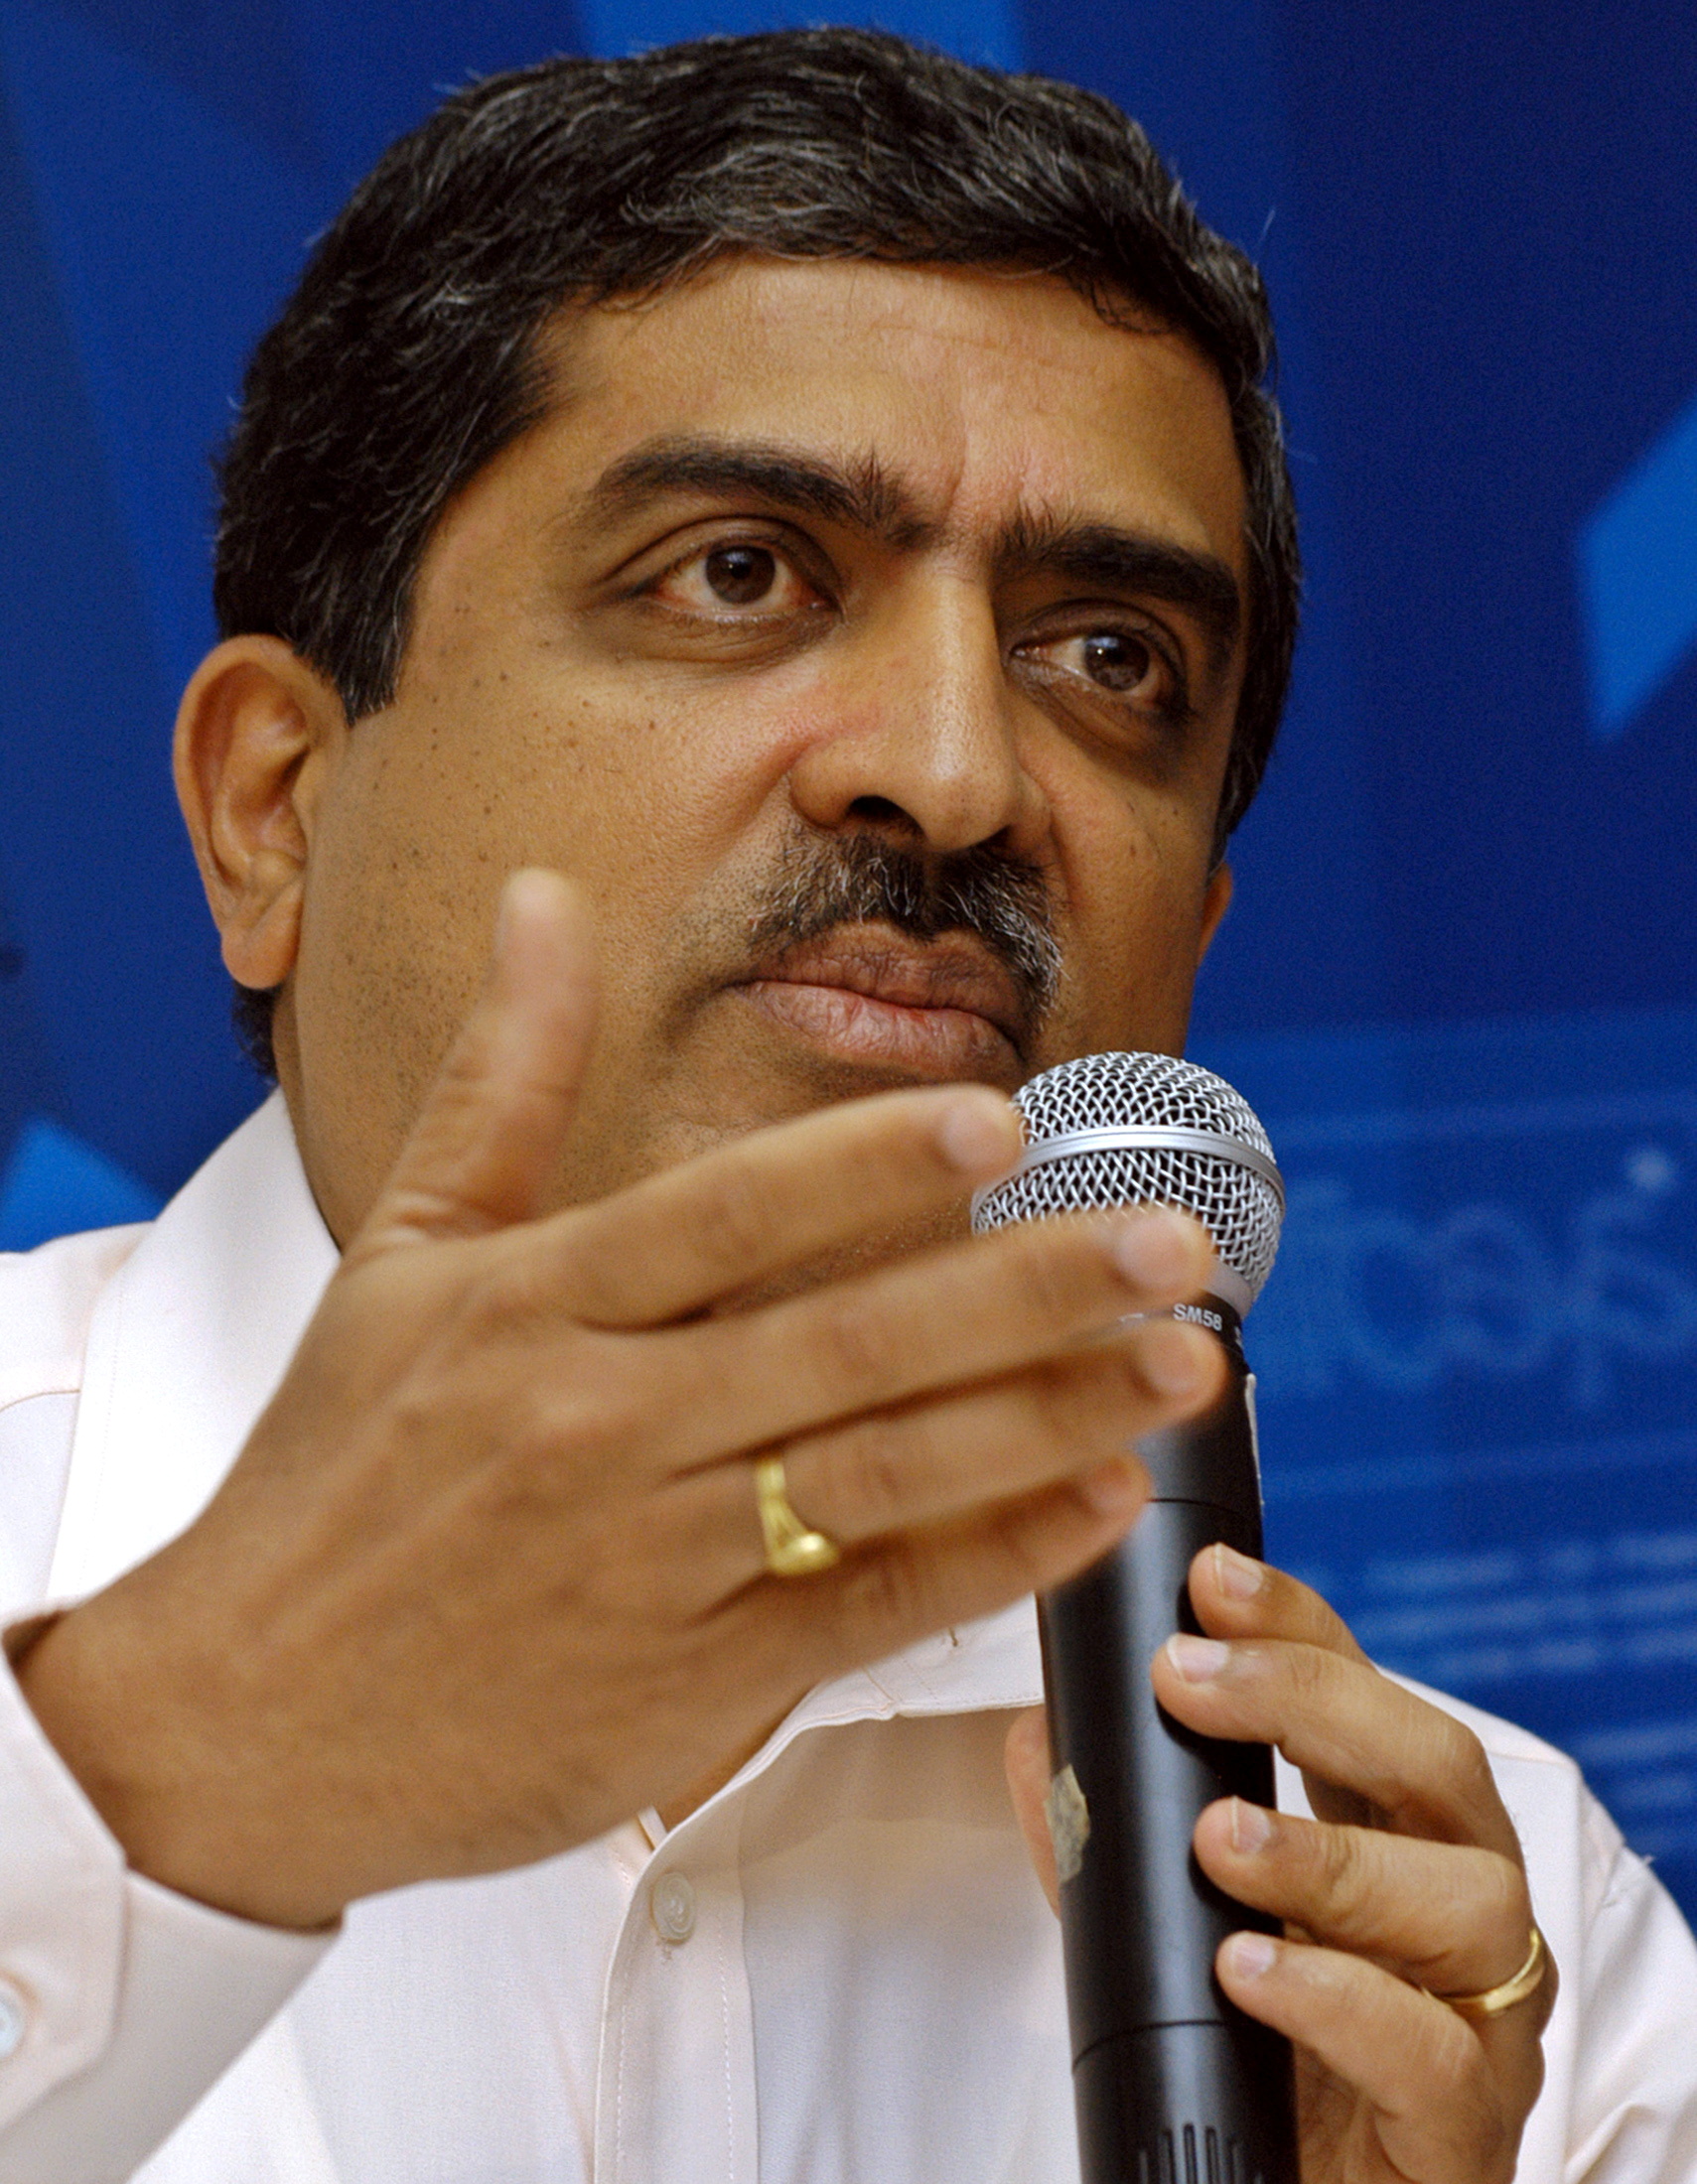 Nandan M. Nilekani, President, Chief Executive Officer and Managing Director of Infosys Technologies, speaks during a news conference in the southern Indian city of Bangalore July 12, 2006. REUTERS/Jagadeesh Nv/File Photo